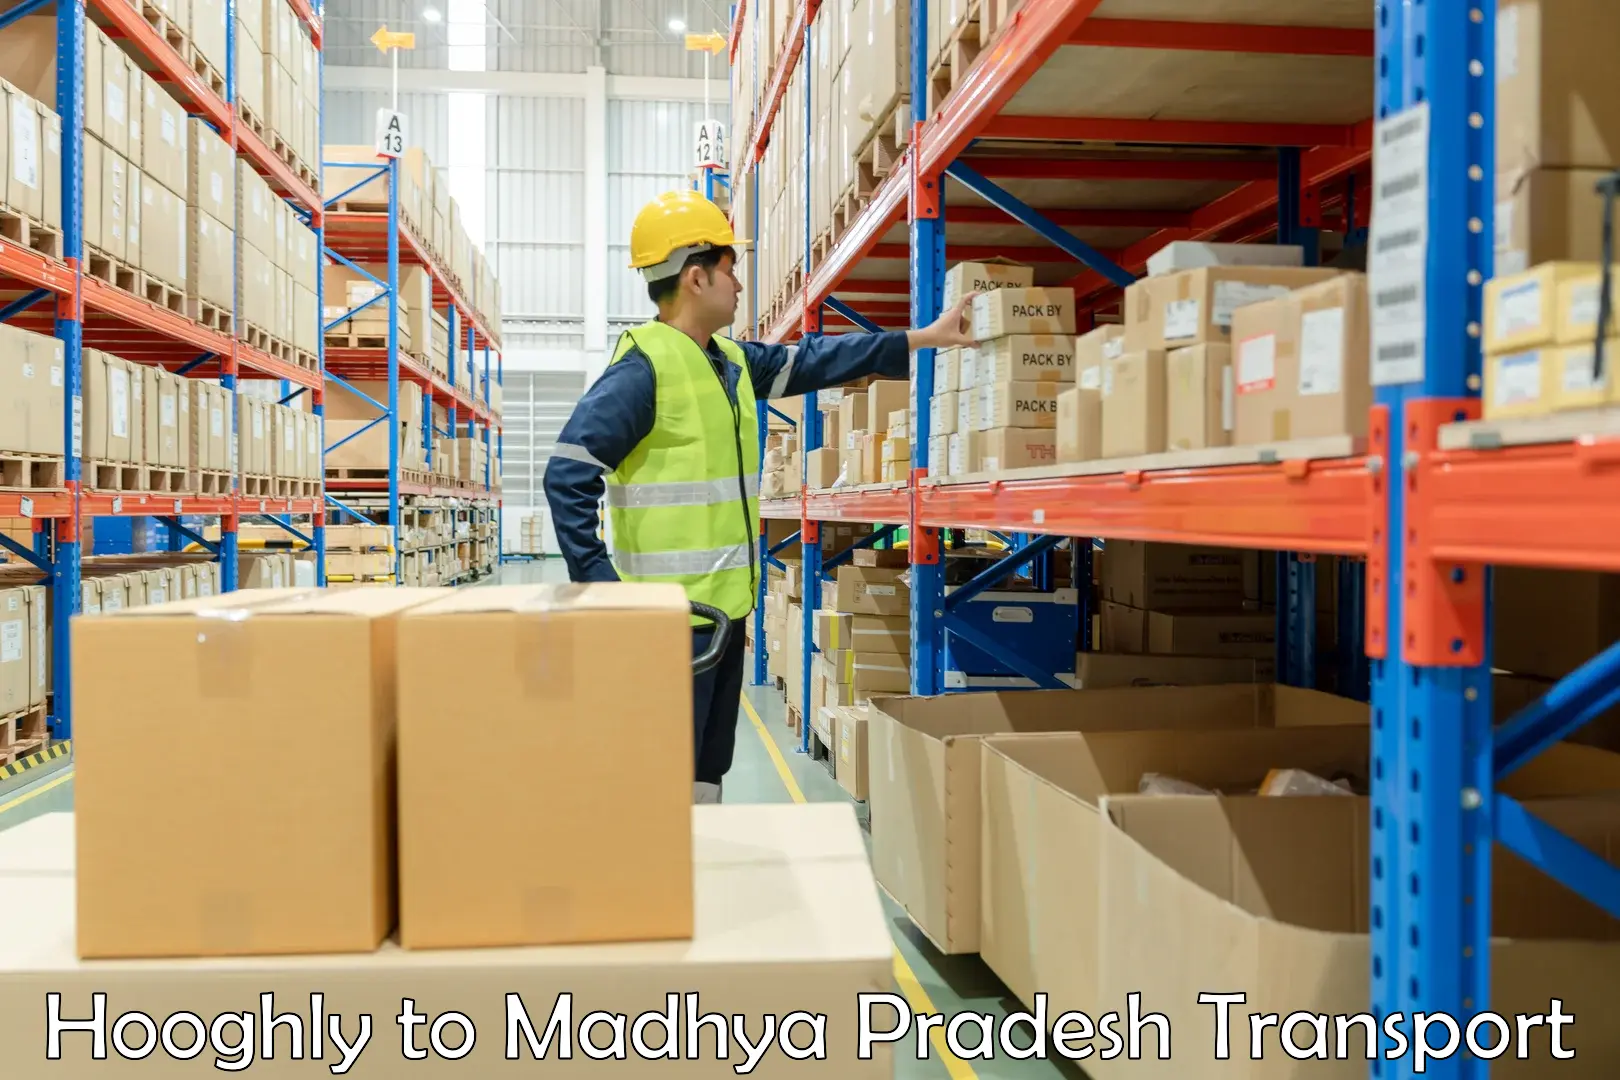 Road transport online services Hooghly to Madwas